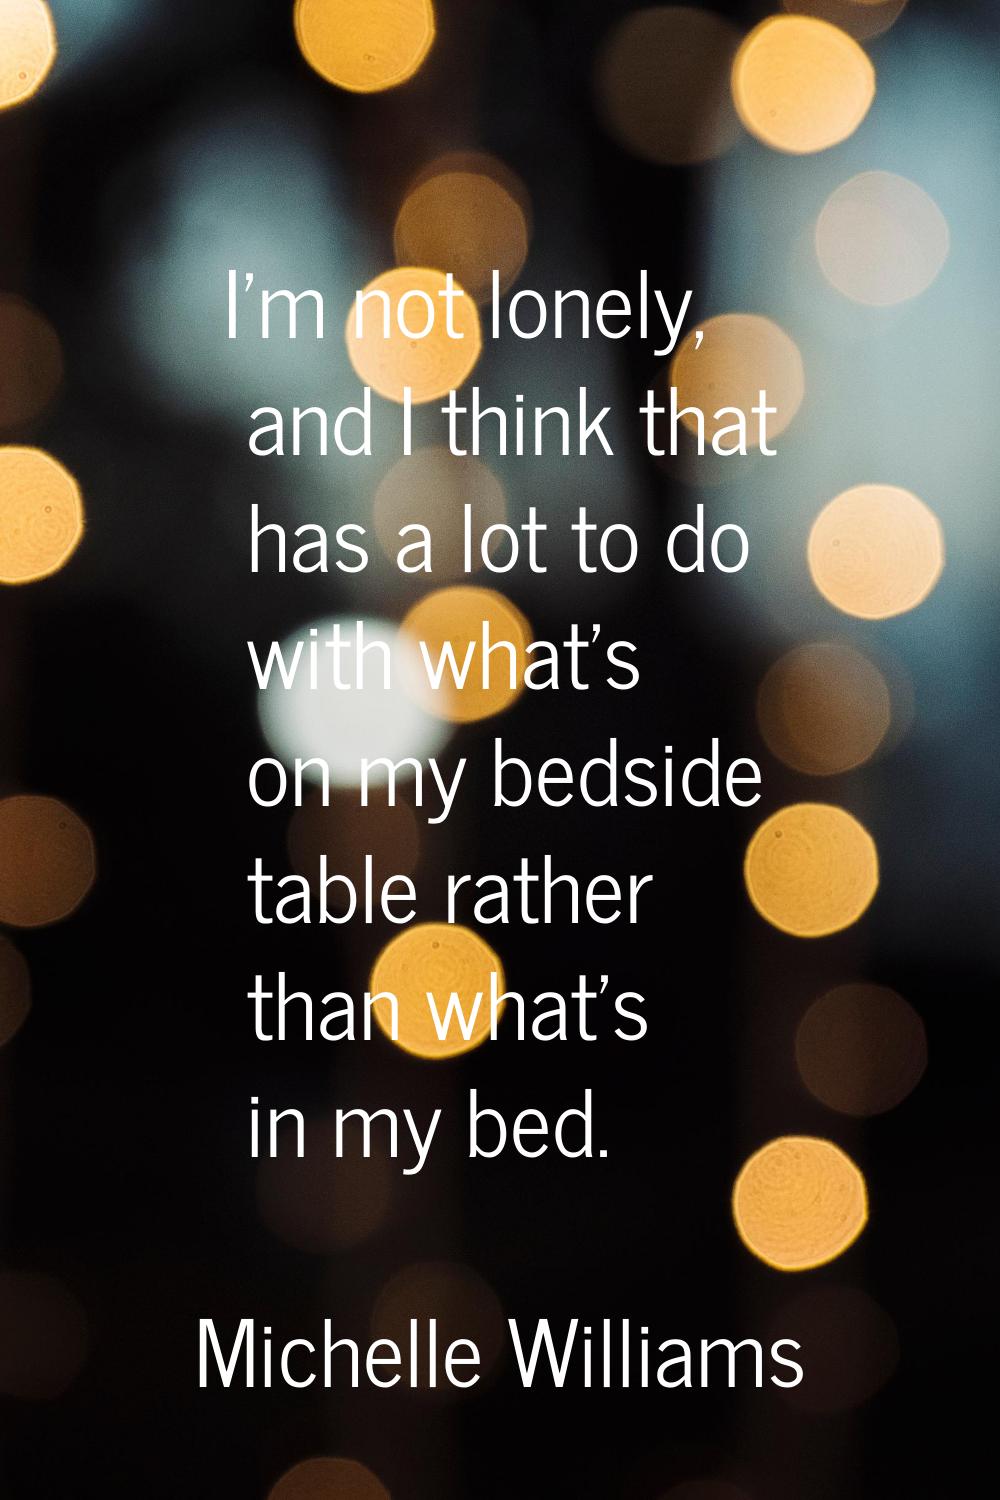 I'm not lonely, and I think that has a lot to do with what's on my bedside table rather than what's